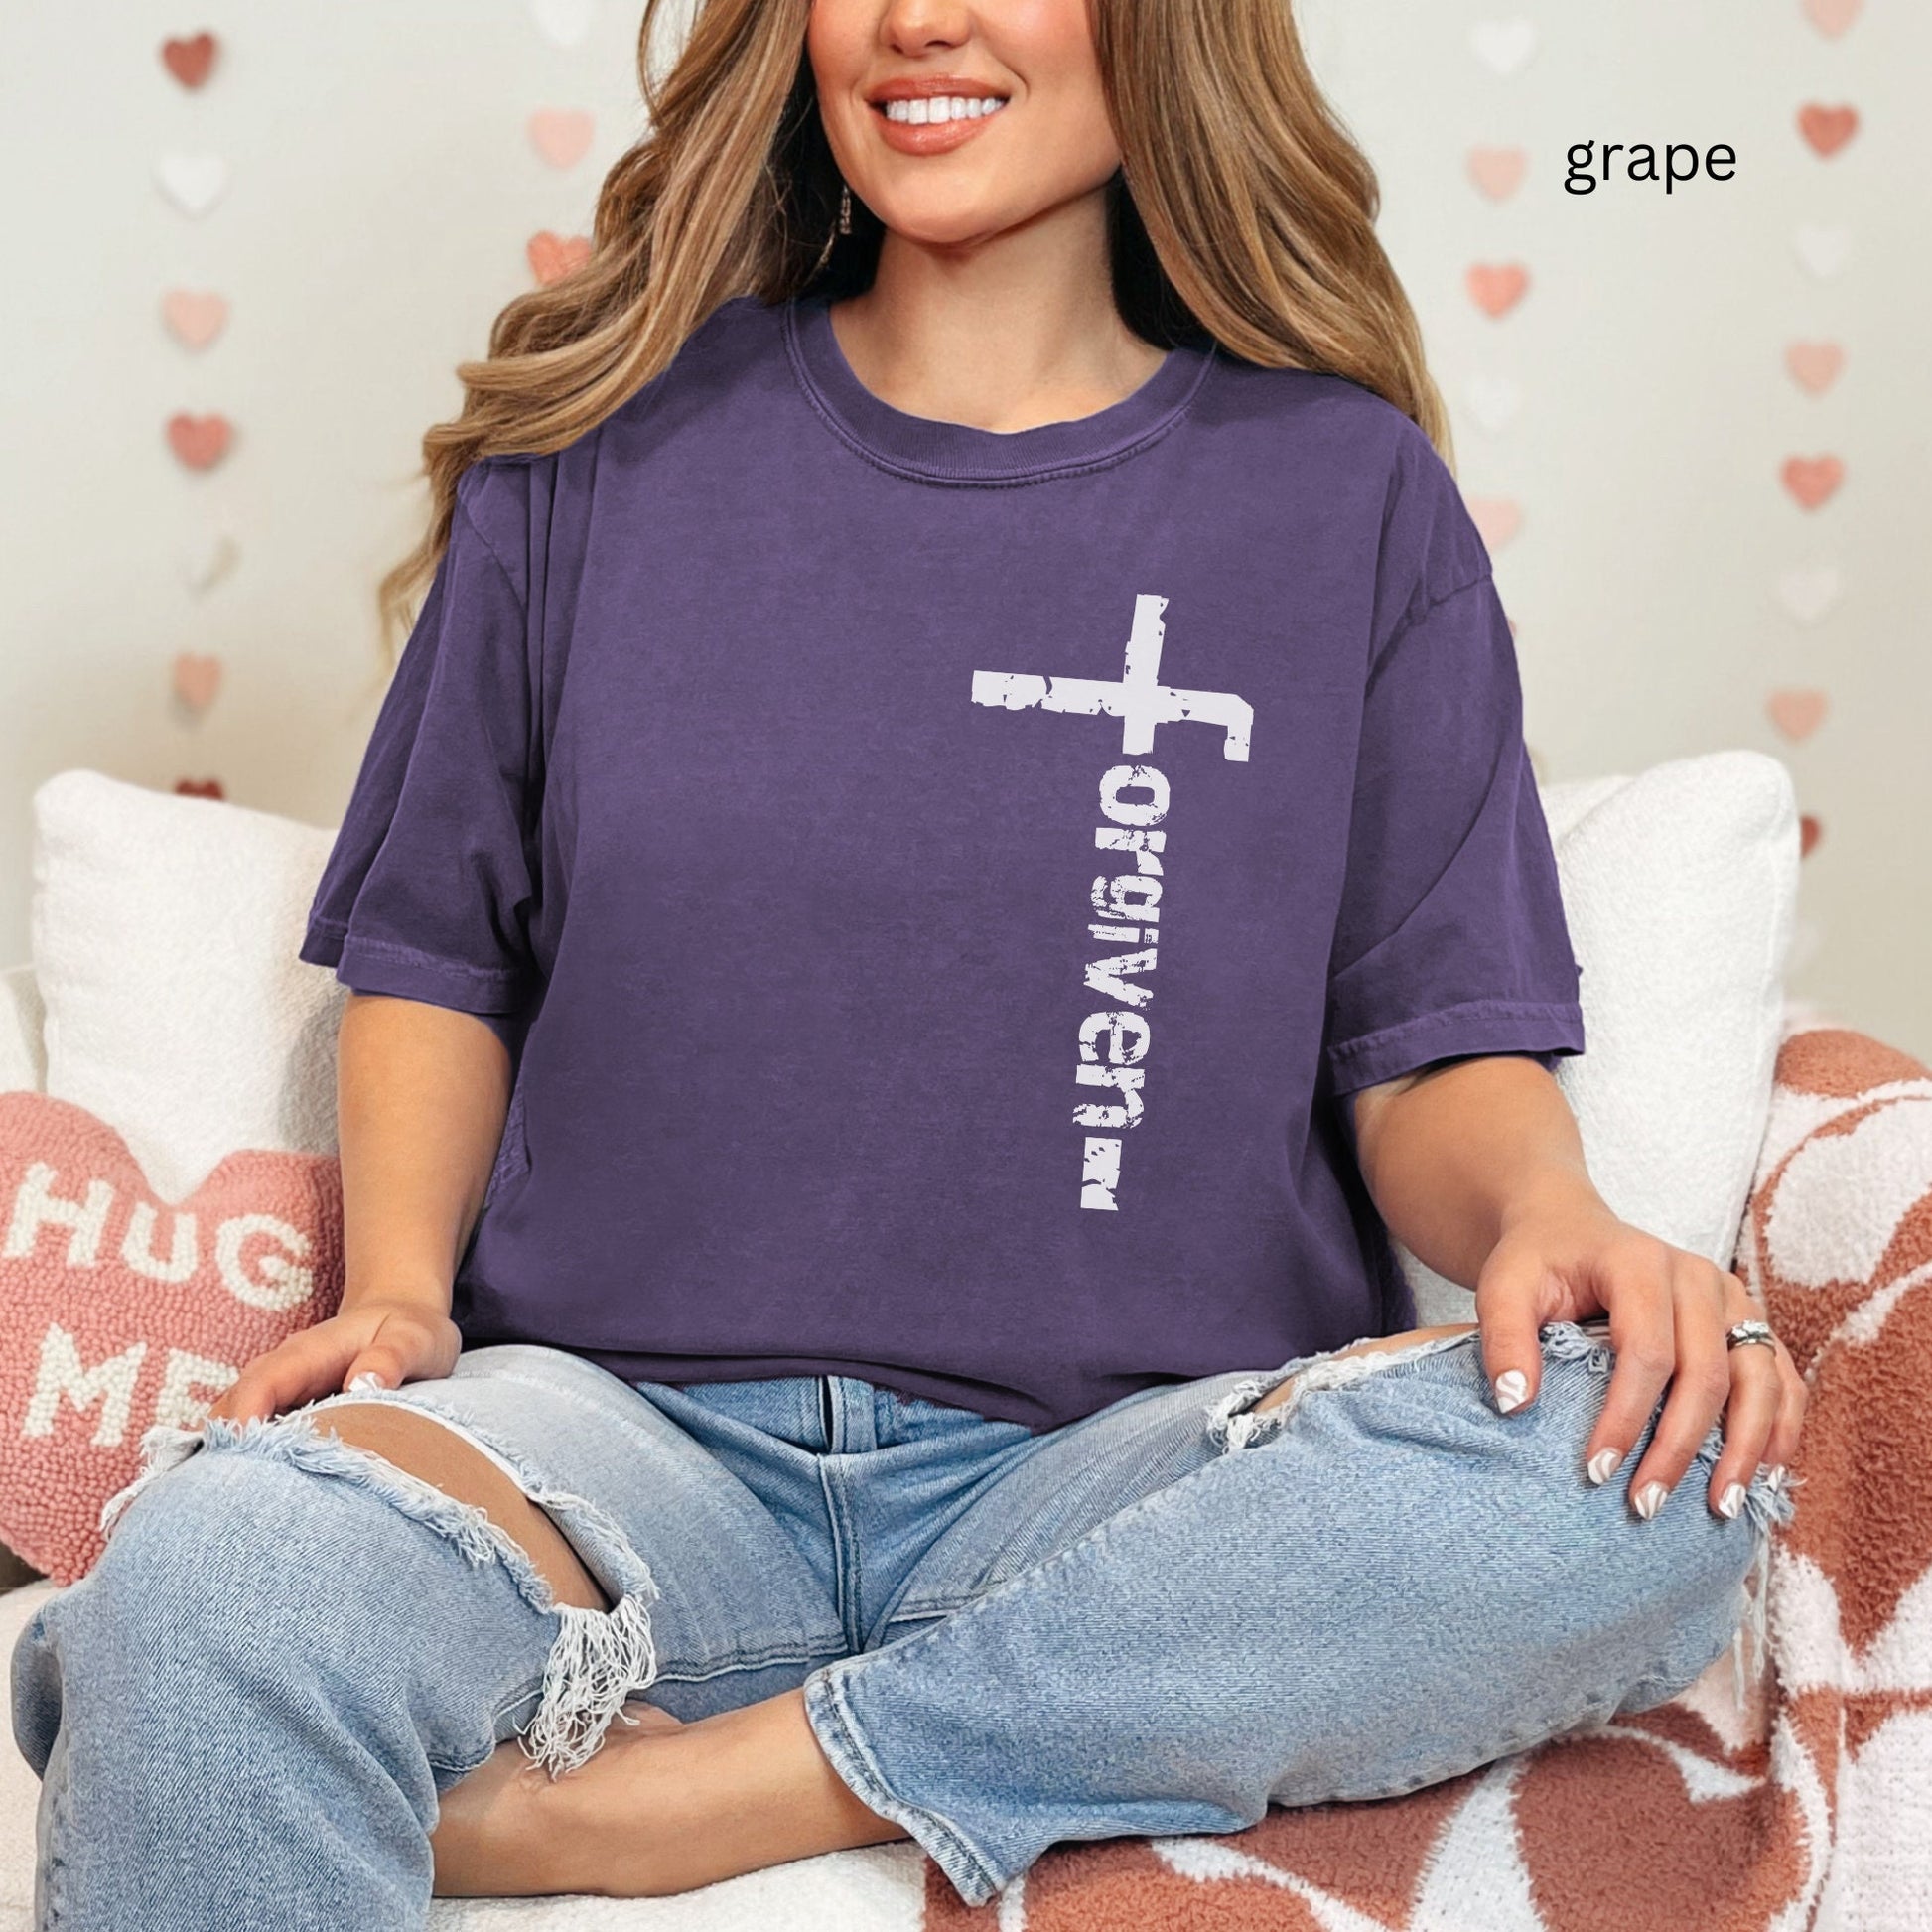 Christian grunge Bible Verse Comfort Color t-shirt in  grape color